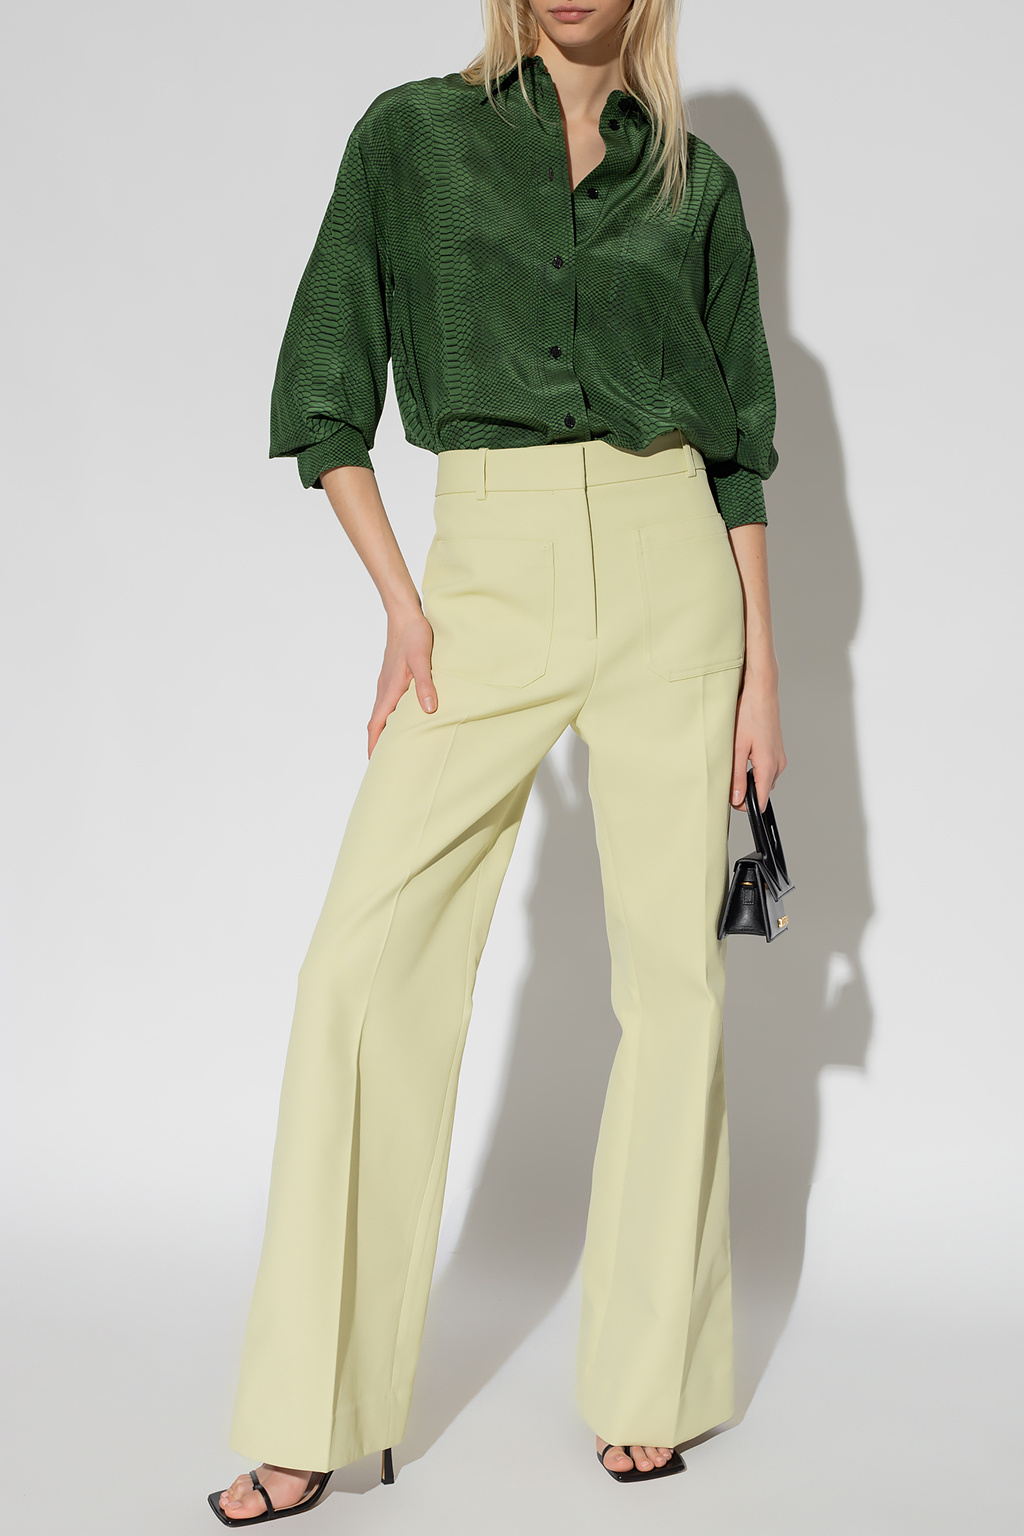 GenesinlifeShops Spain - Green Trousers with pockets Victoria Beckham -  straight-leg track pants White